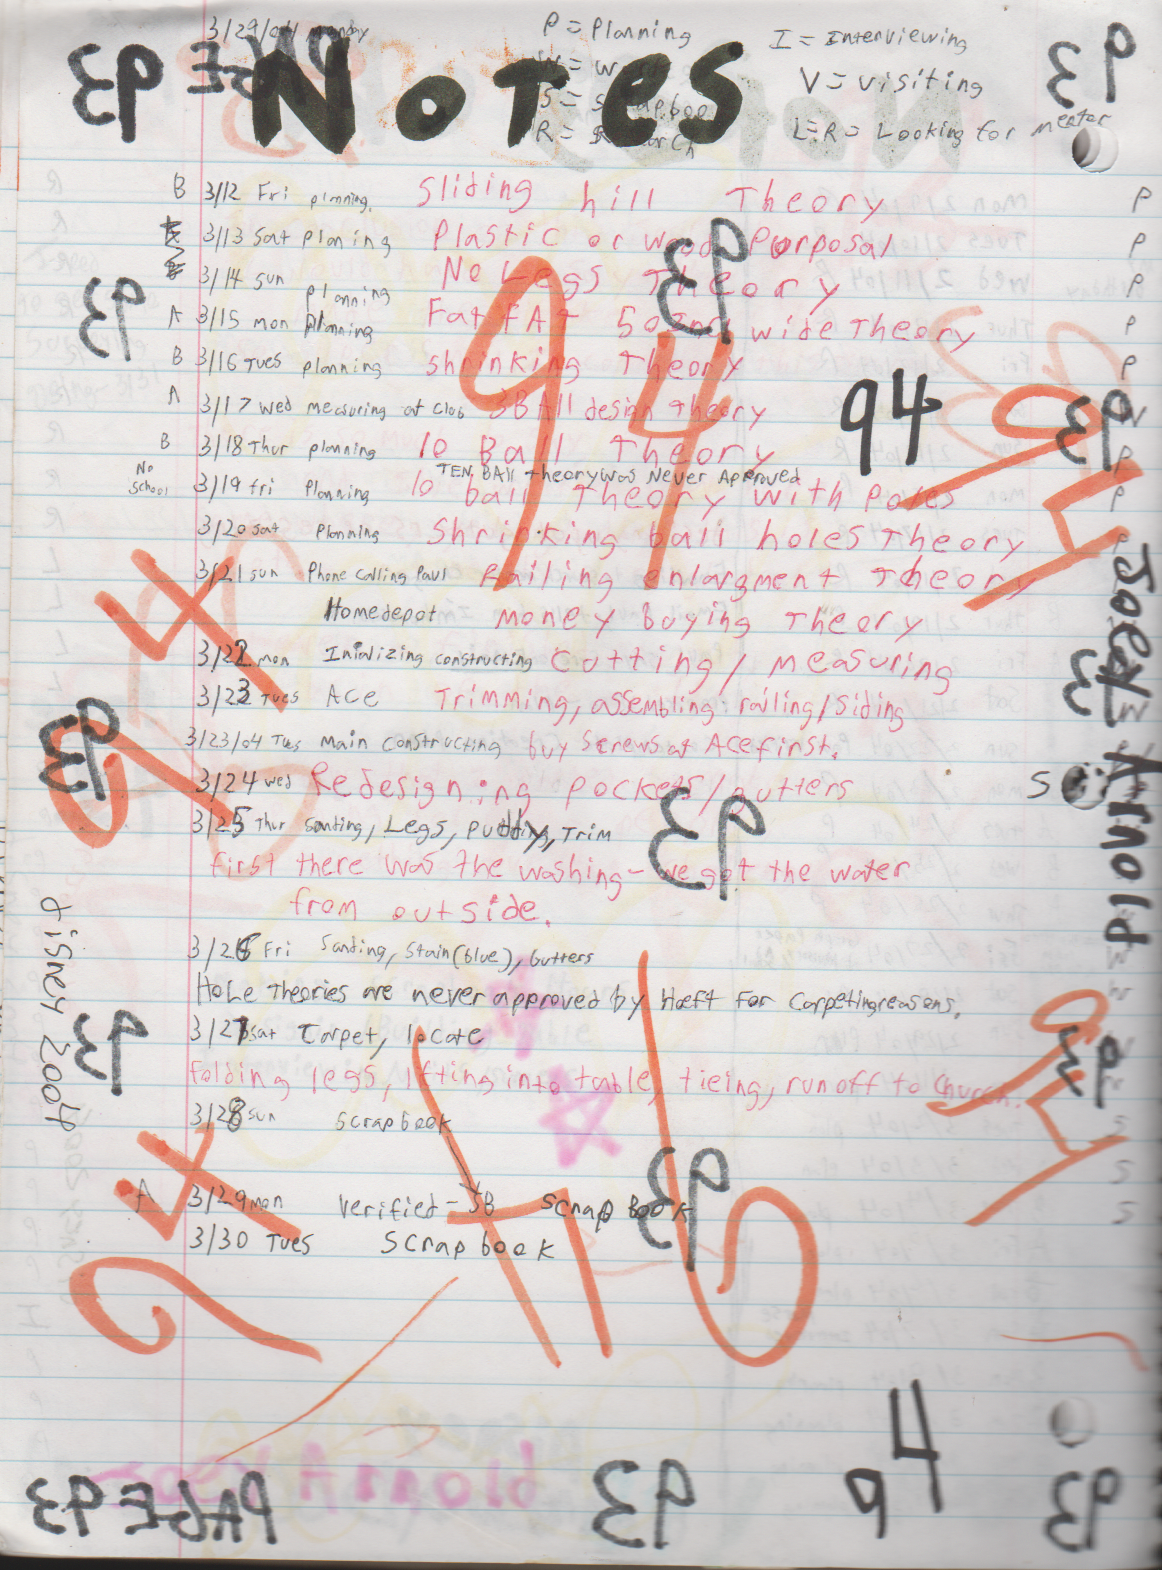 2004-01-29 - Thursday - Carpetball FGHS Senior Project Journal, Joey Arnold, Part 02, 96pages numbered, Notebook-92.png